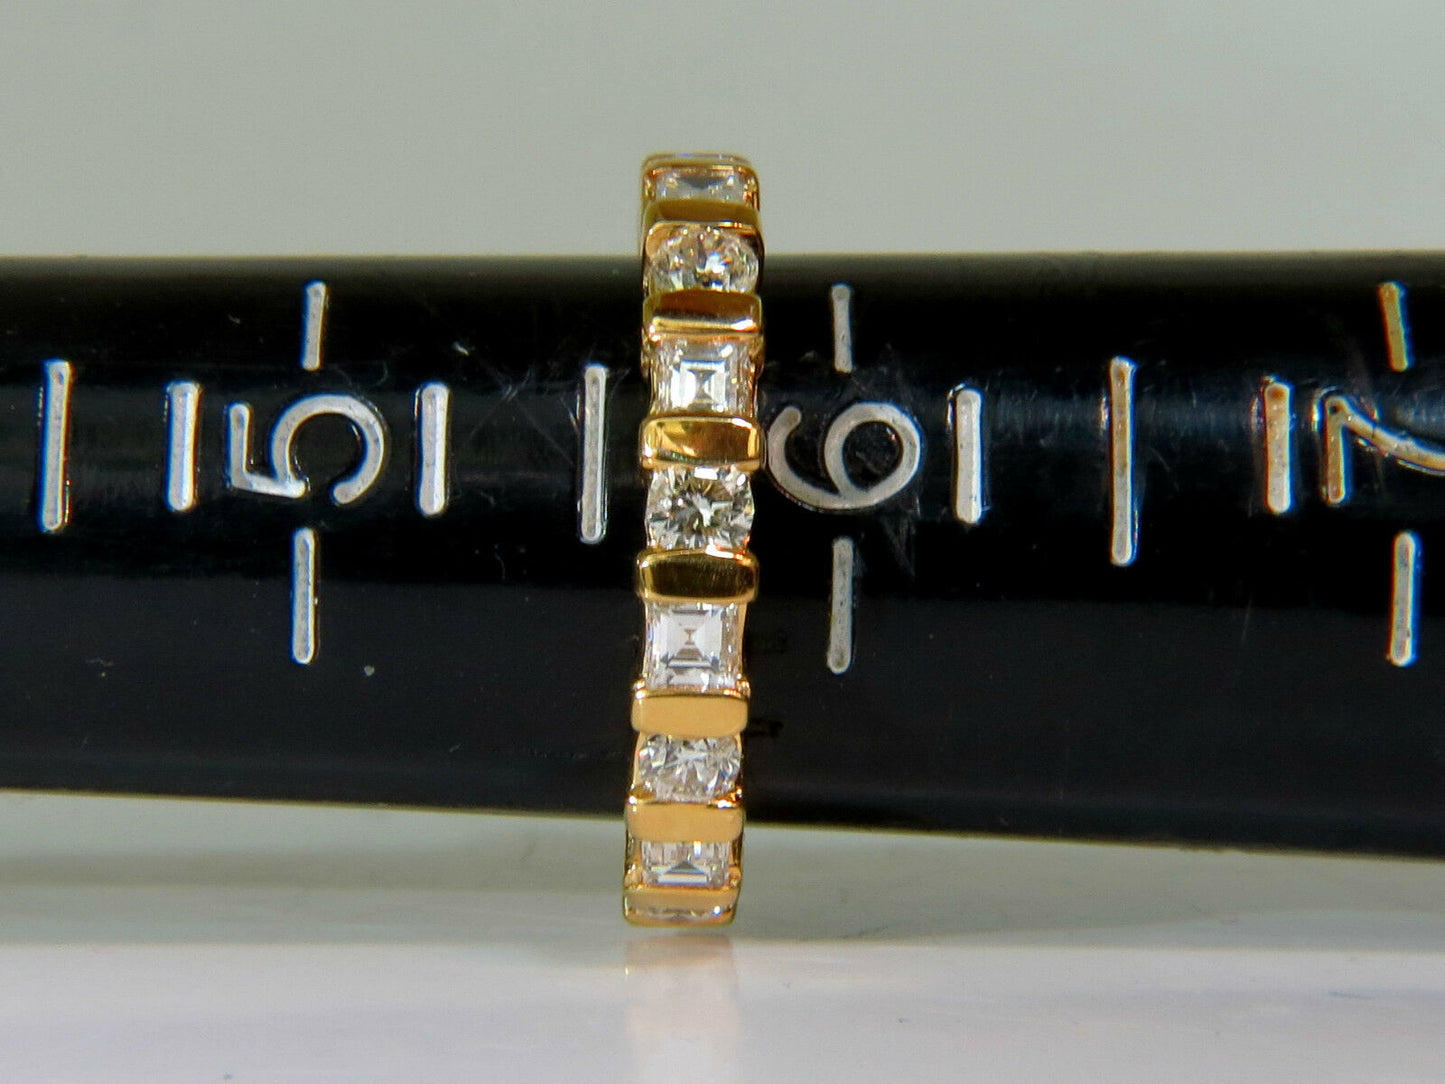 1.50CT Diamond Eternity Band Baguette Rounds 14KT